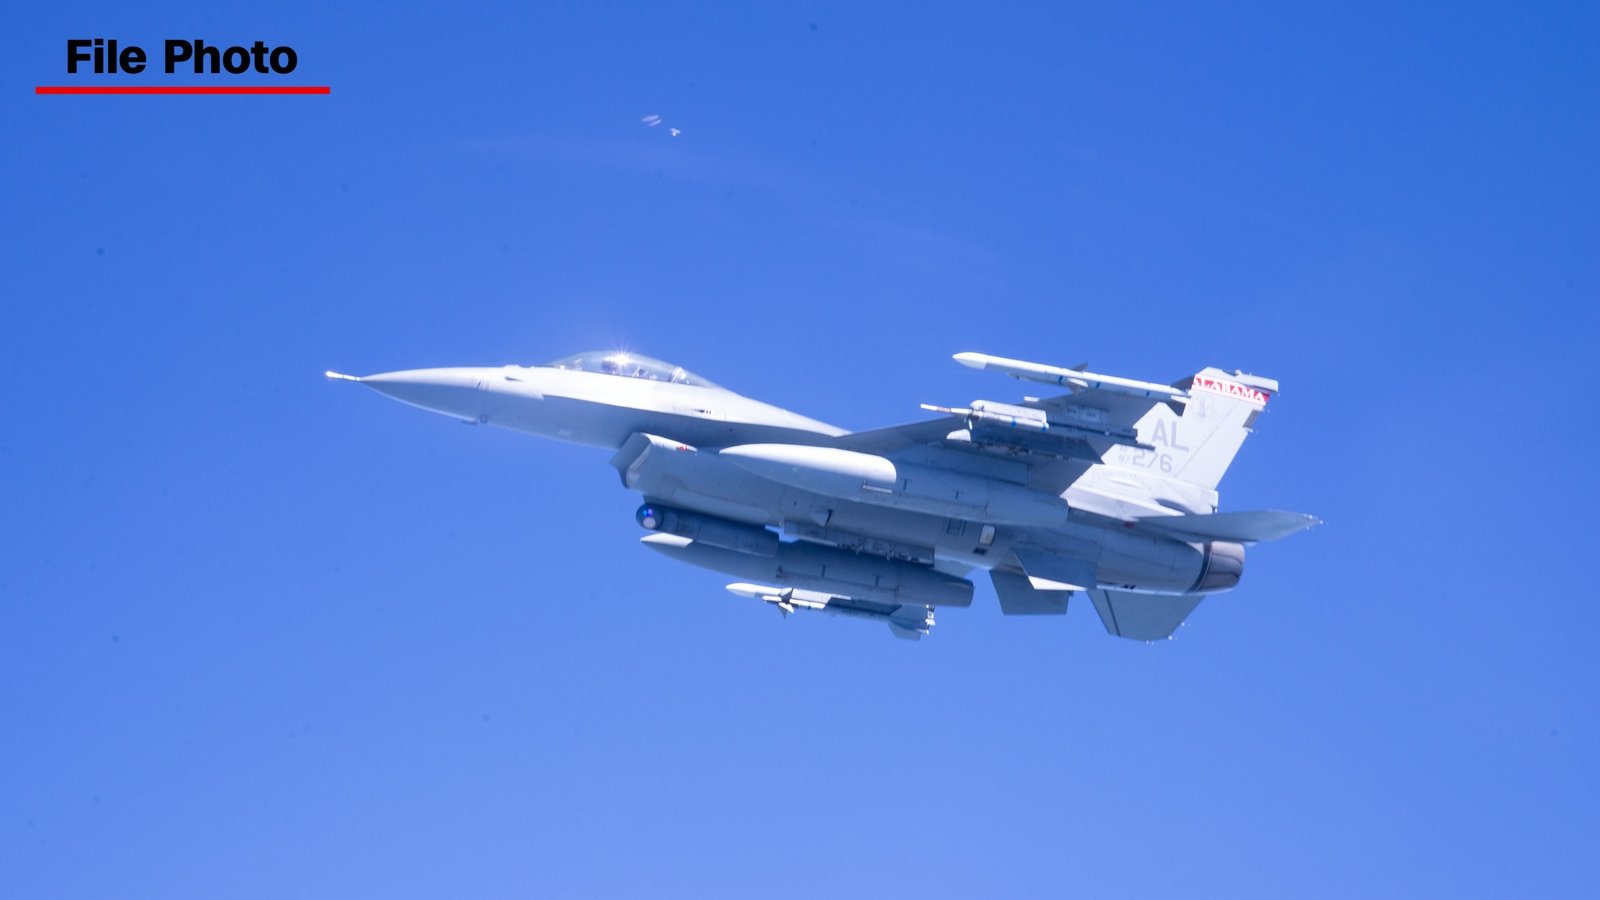 U.S. Fighter Jet Shot Down Unidentified Object in Northern Canada